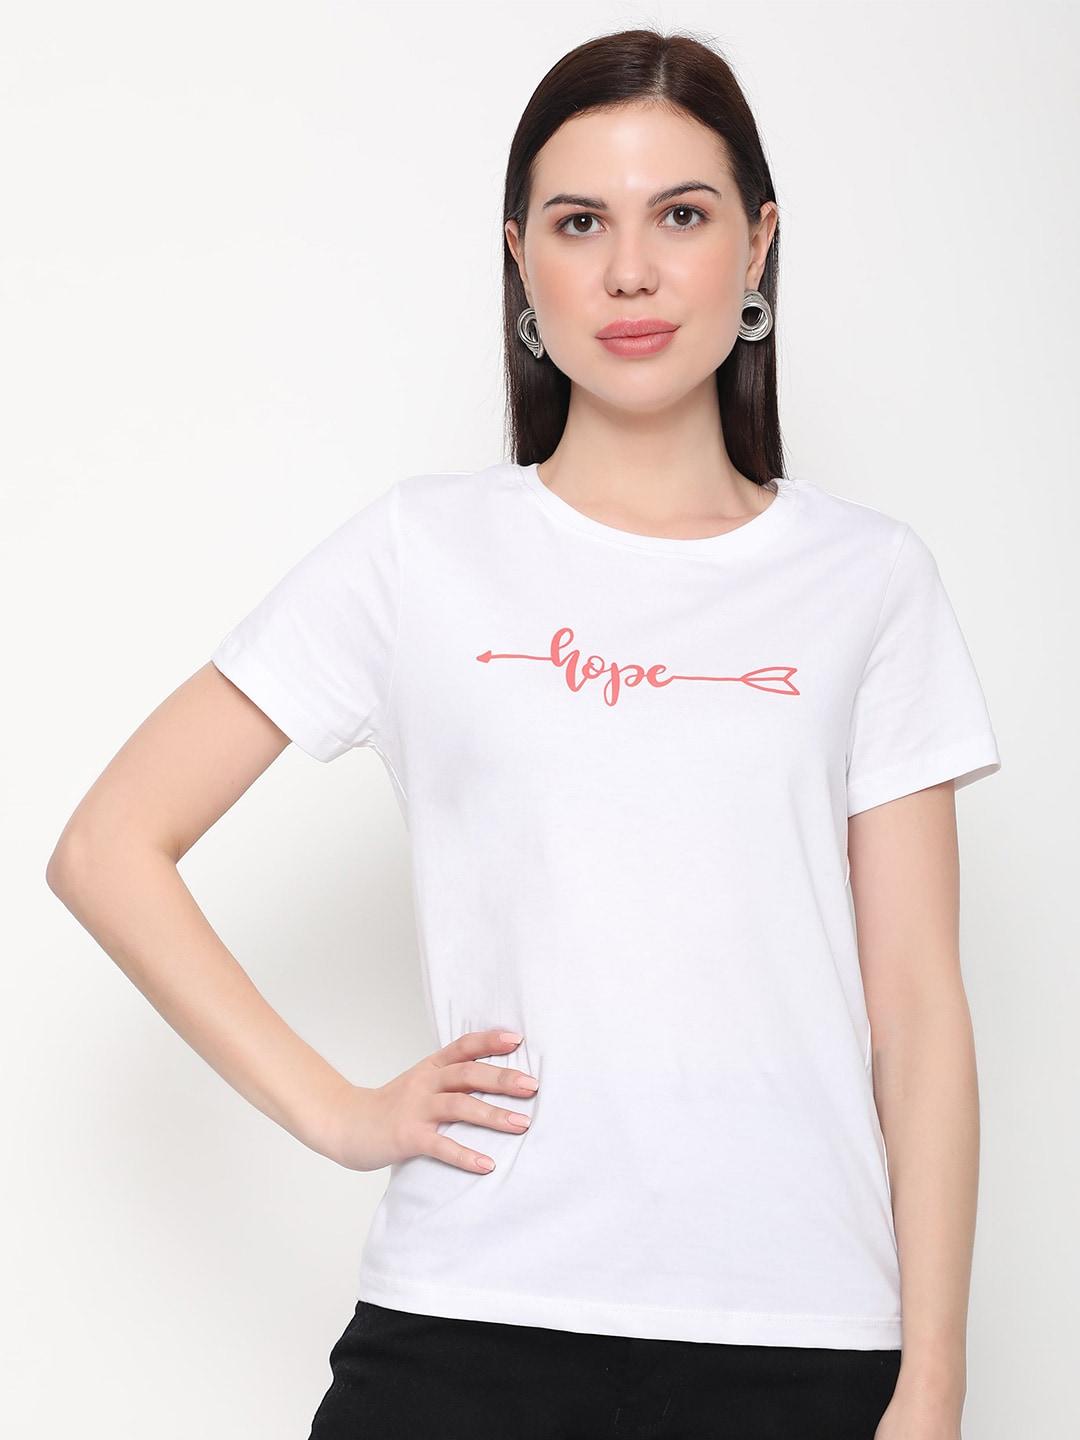 outflits-women-typography-printed-cotton-t-shirt